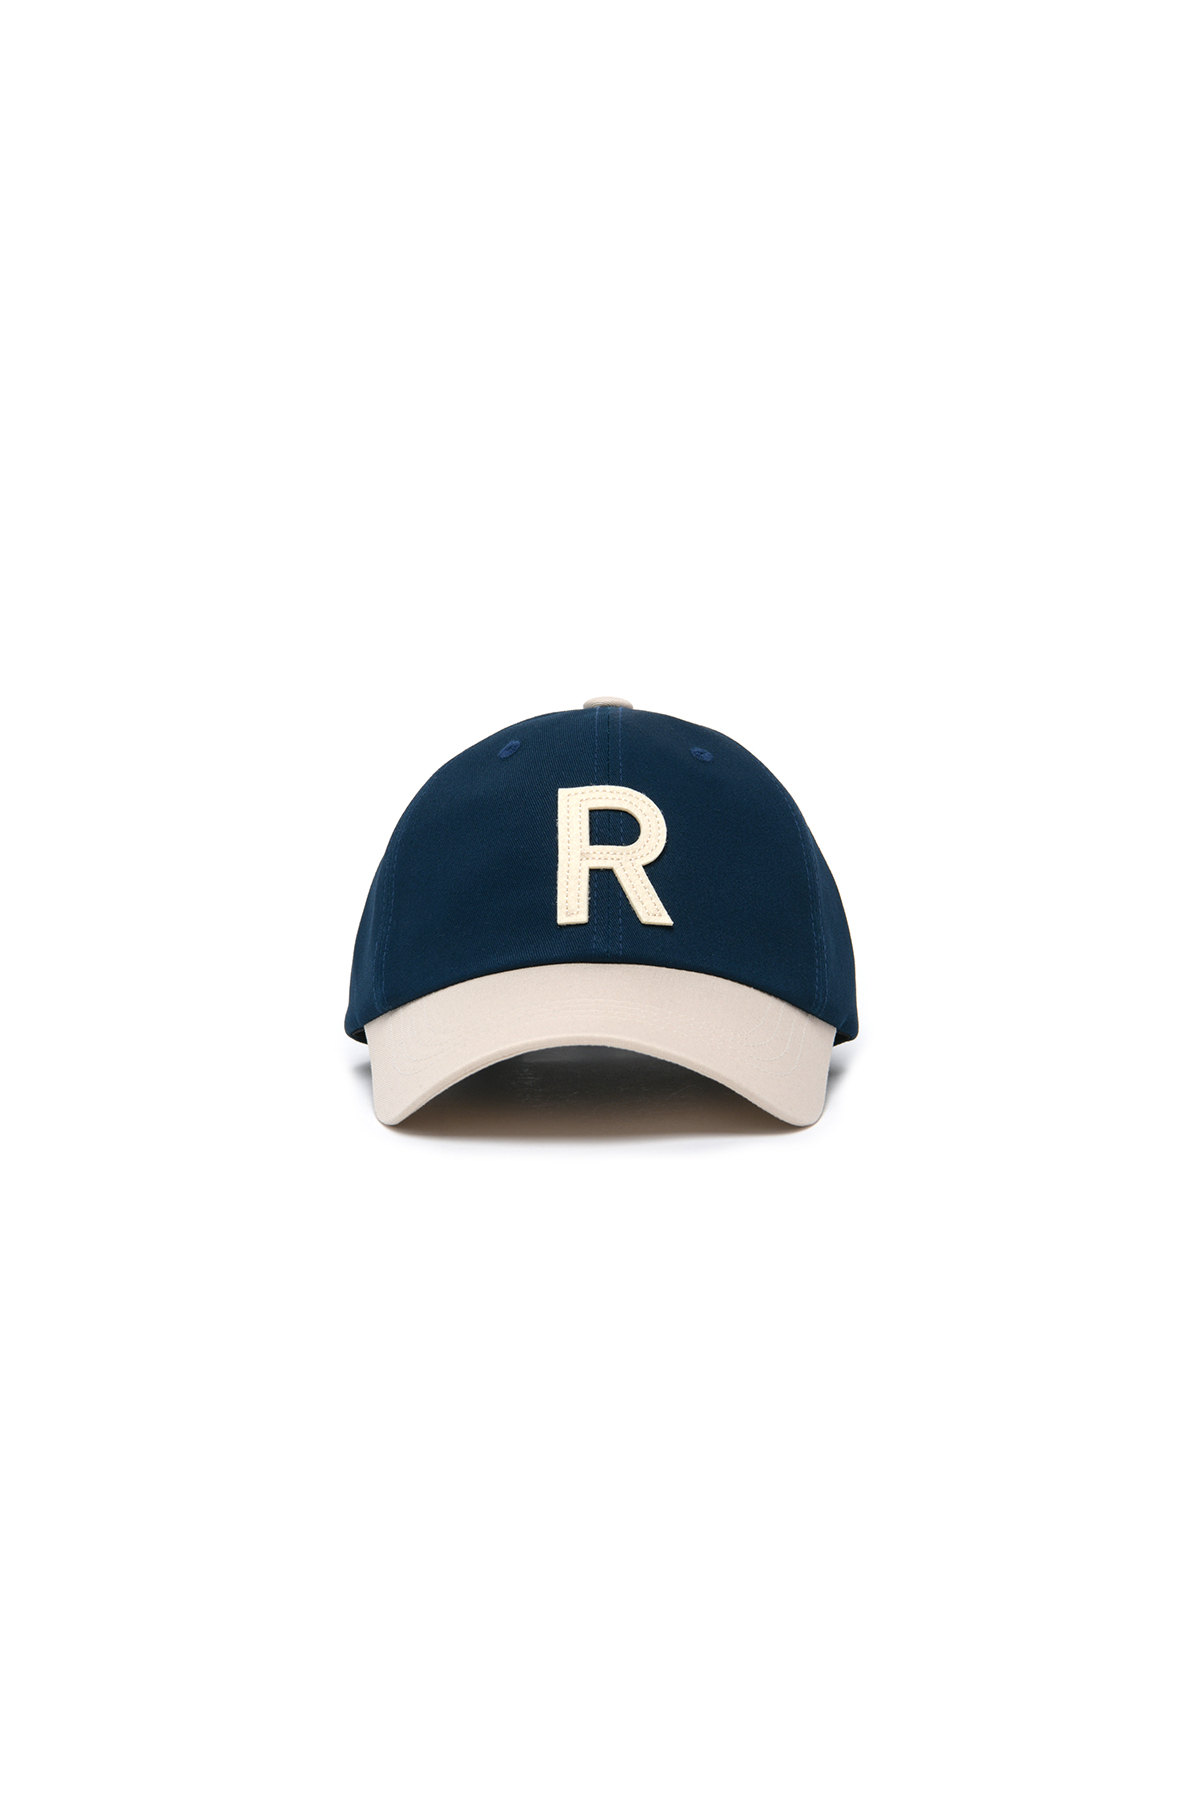 R PATCH BALL CAP IVORY/NAVY